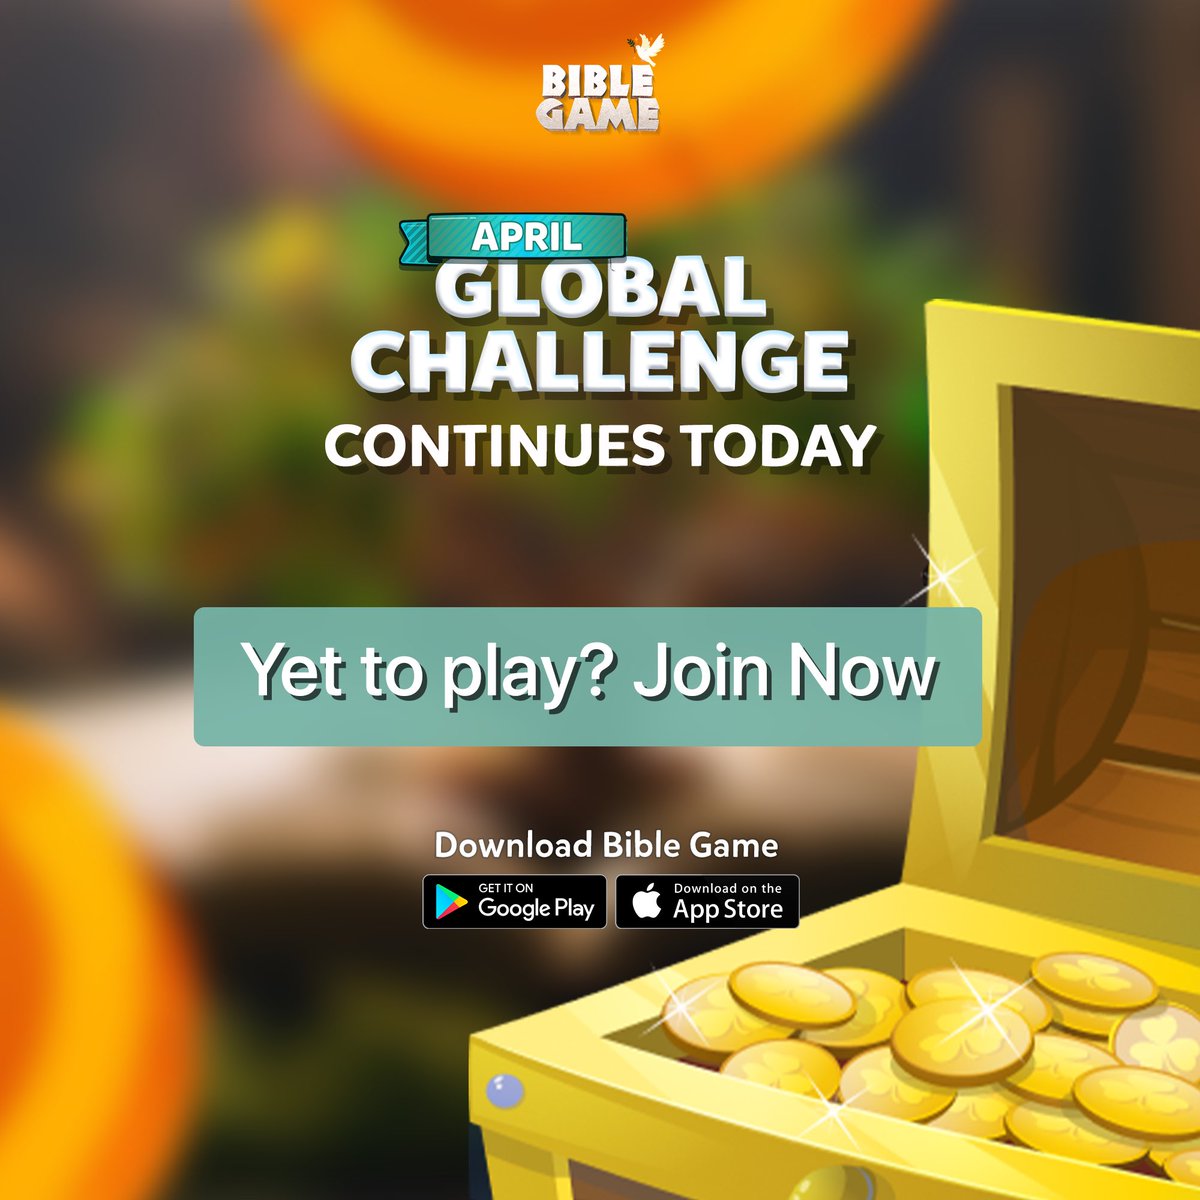 It’s not too late to play. Do it now!

#Biblegame #globalchallenge